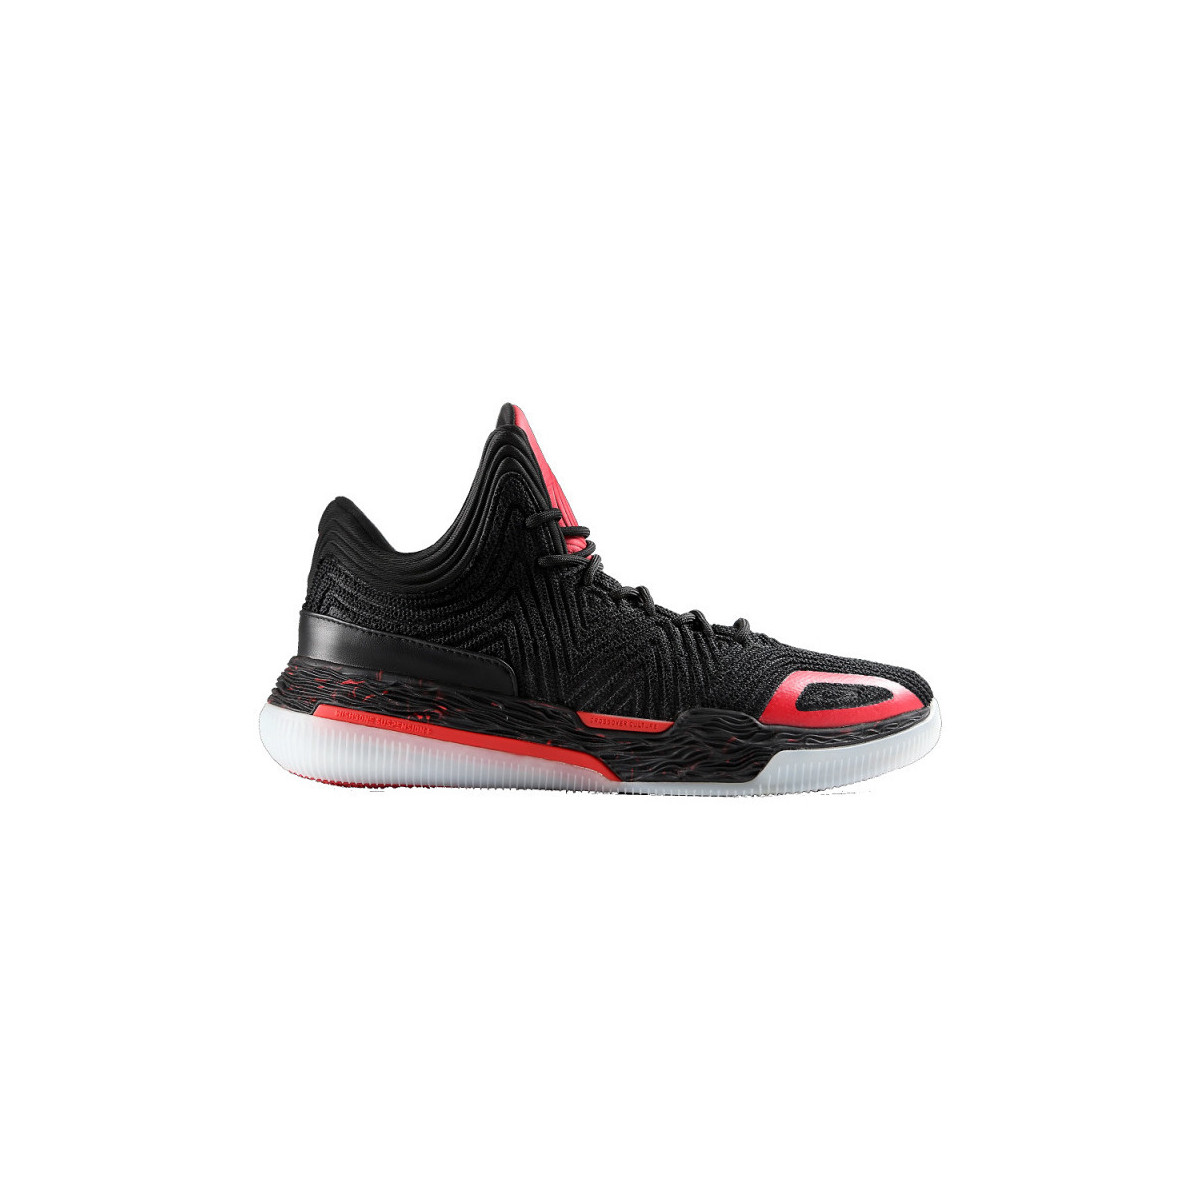 Chaussures Basketball Crossover Culture Chaussures de basketball Cross Multicolore